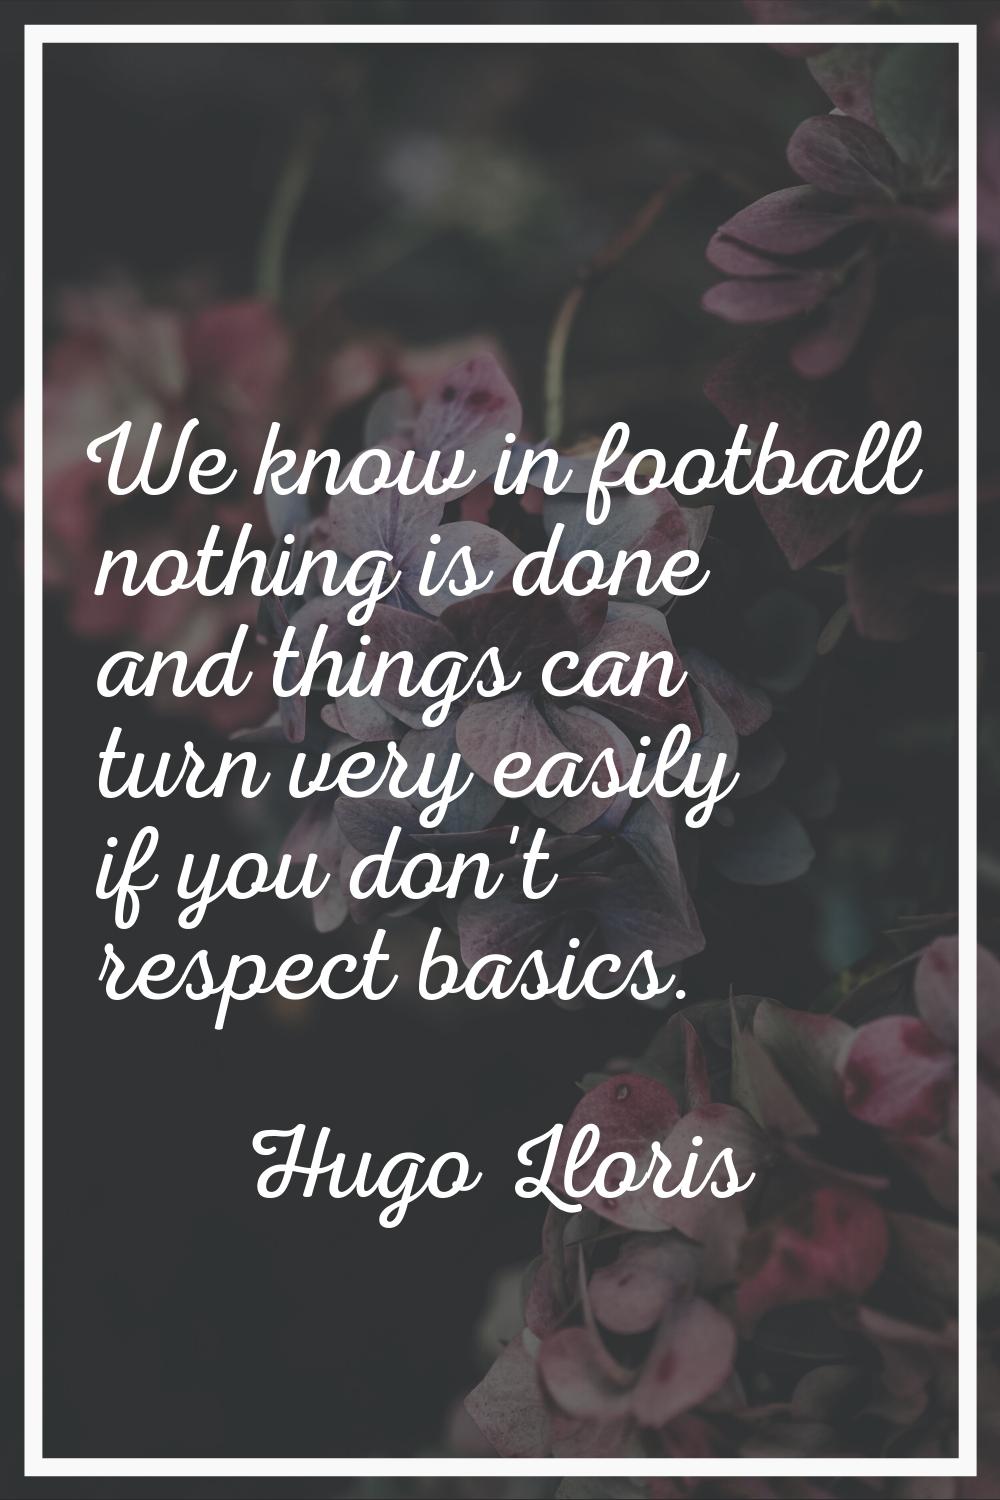 We know in football nothing is done and things can turn very easily if you don't respect basics.